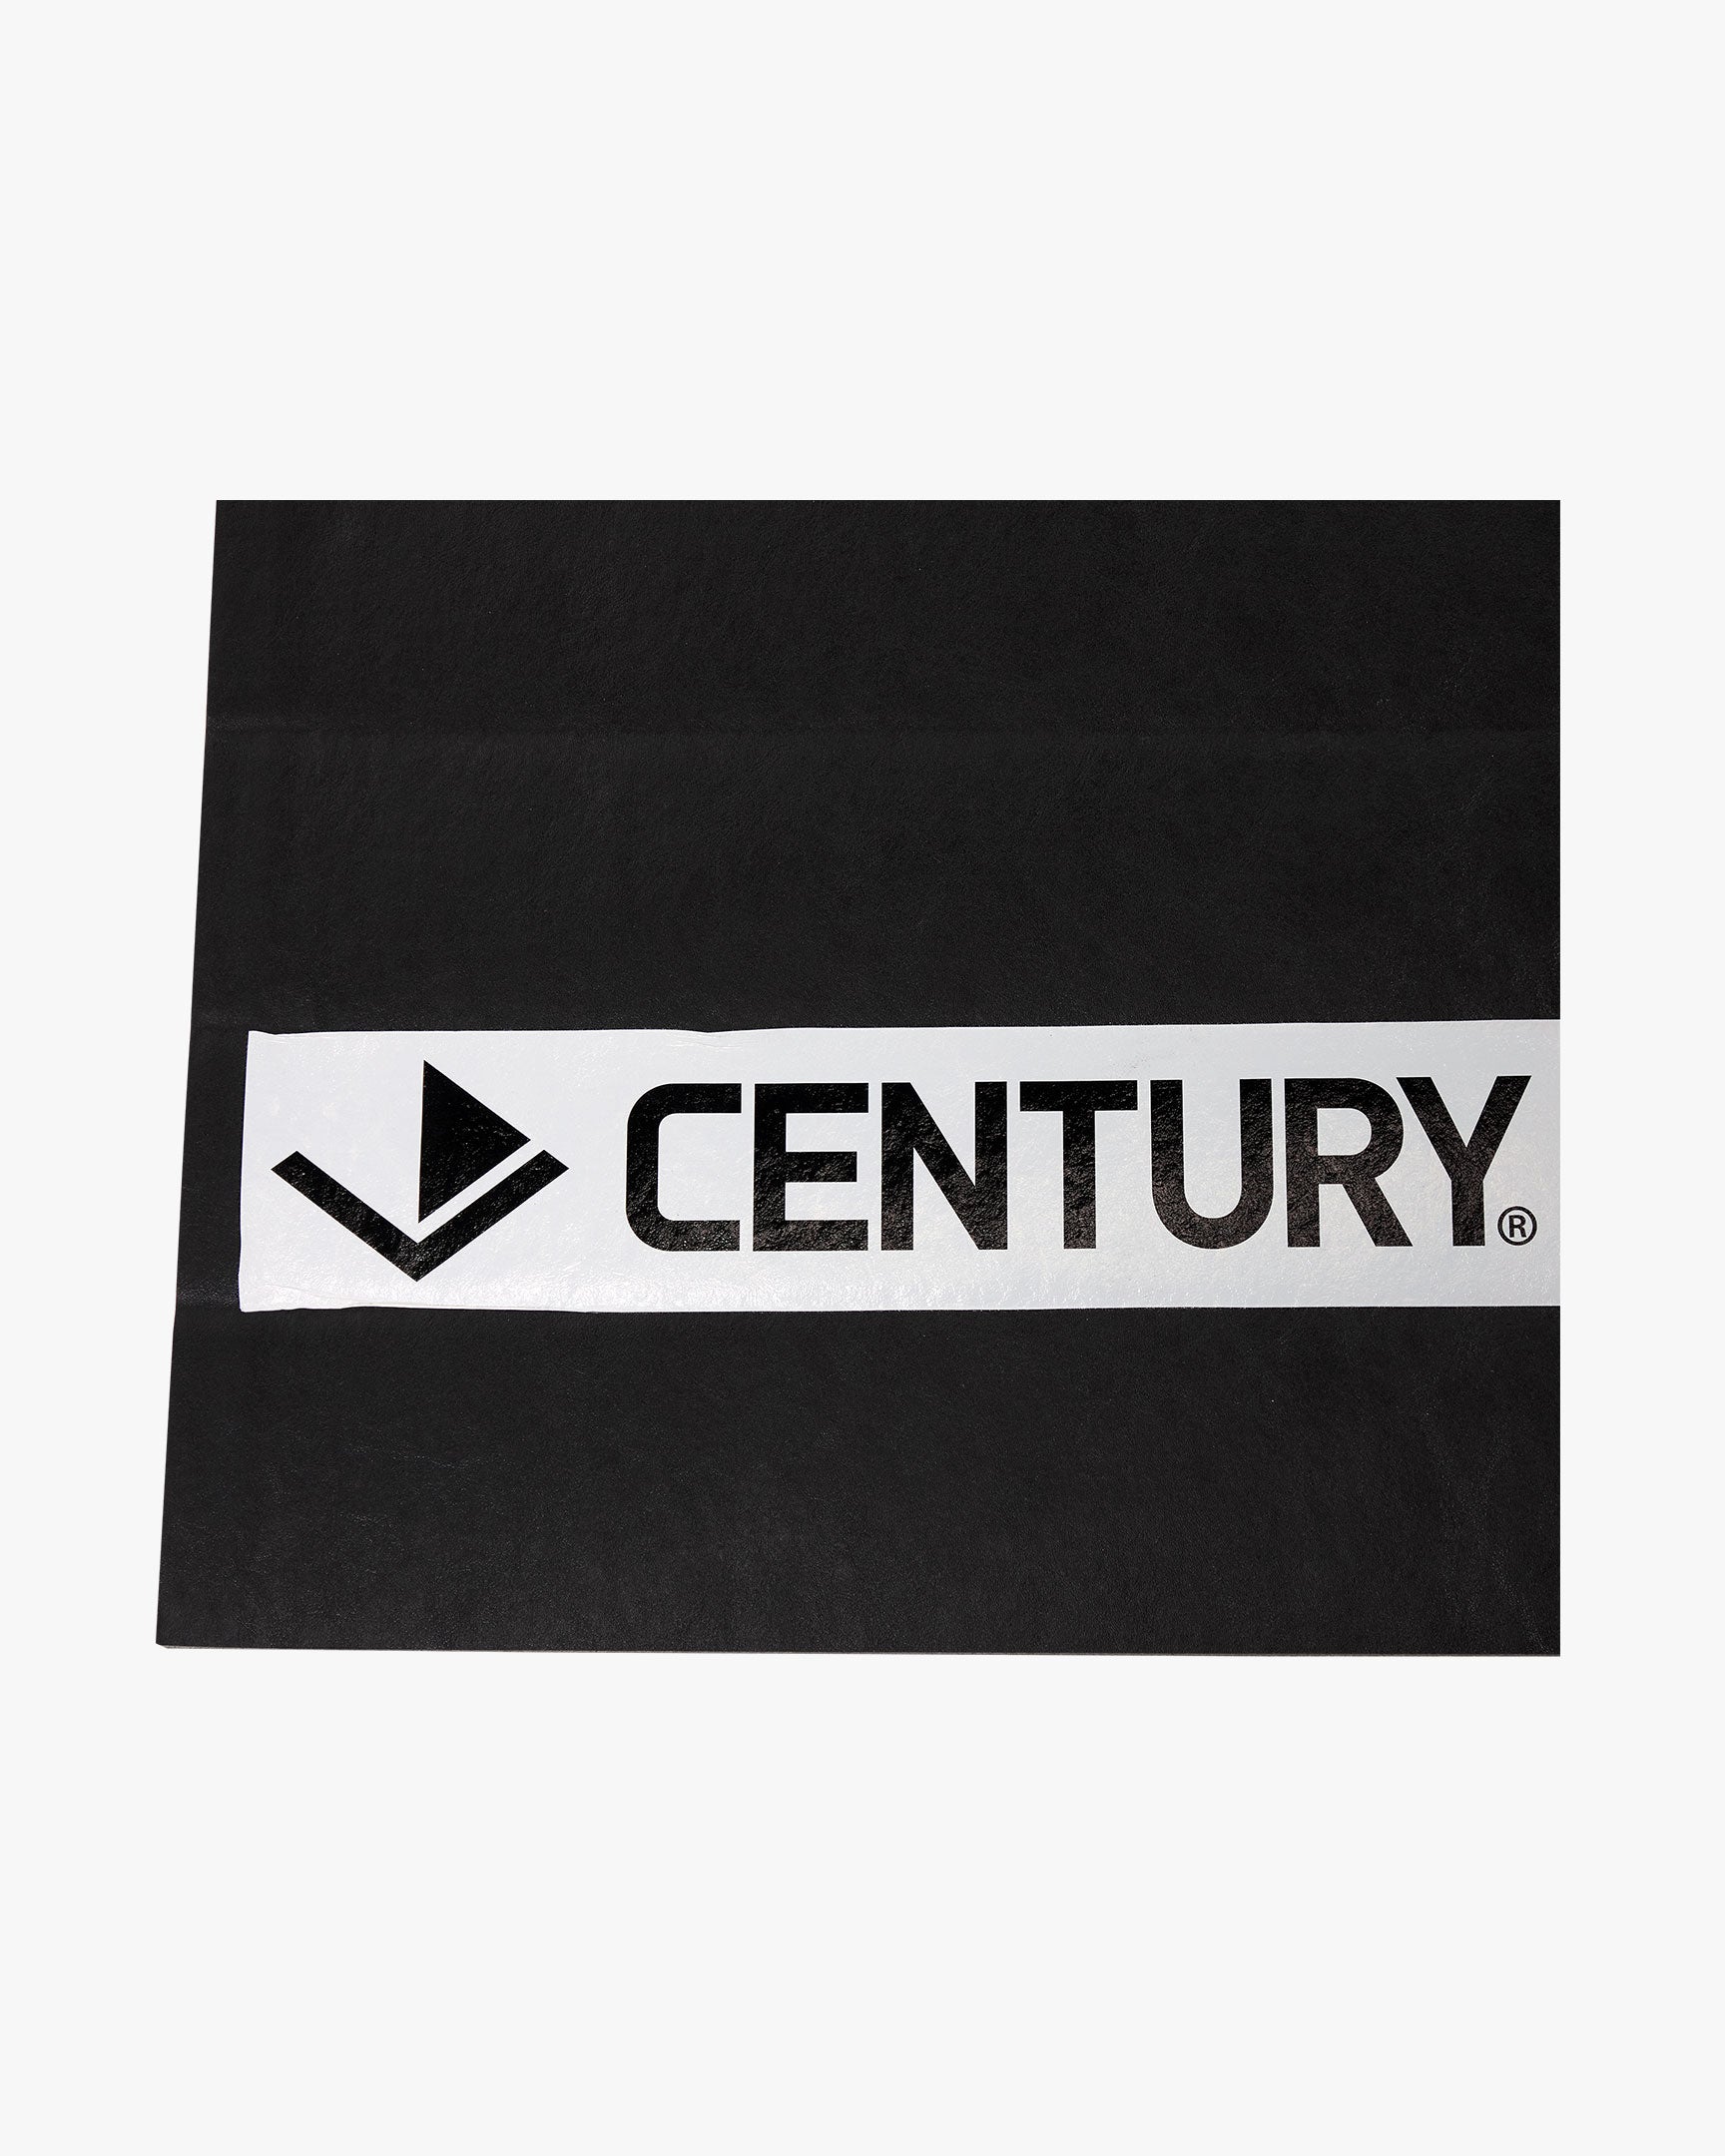 5' x 13' Century Smooth Roll Out Mat